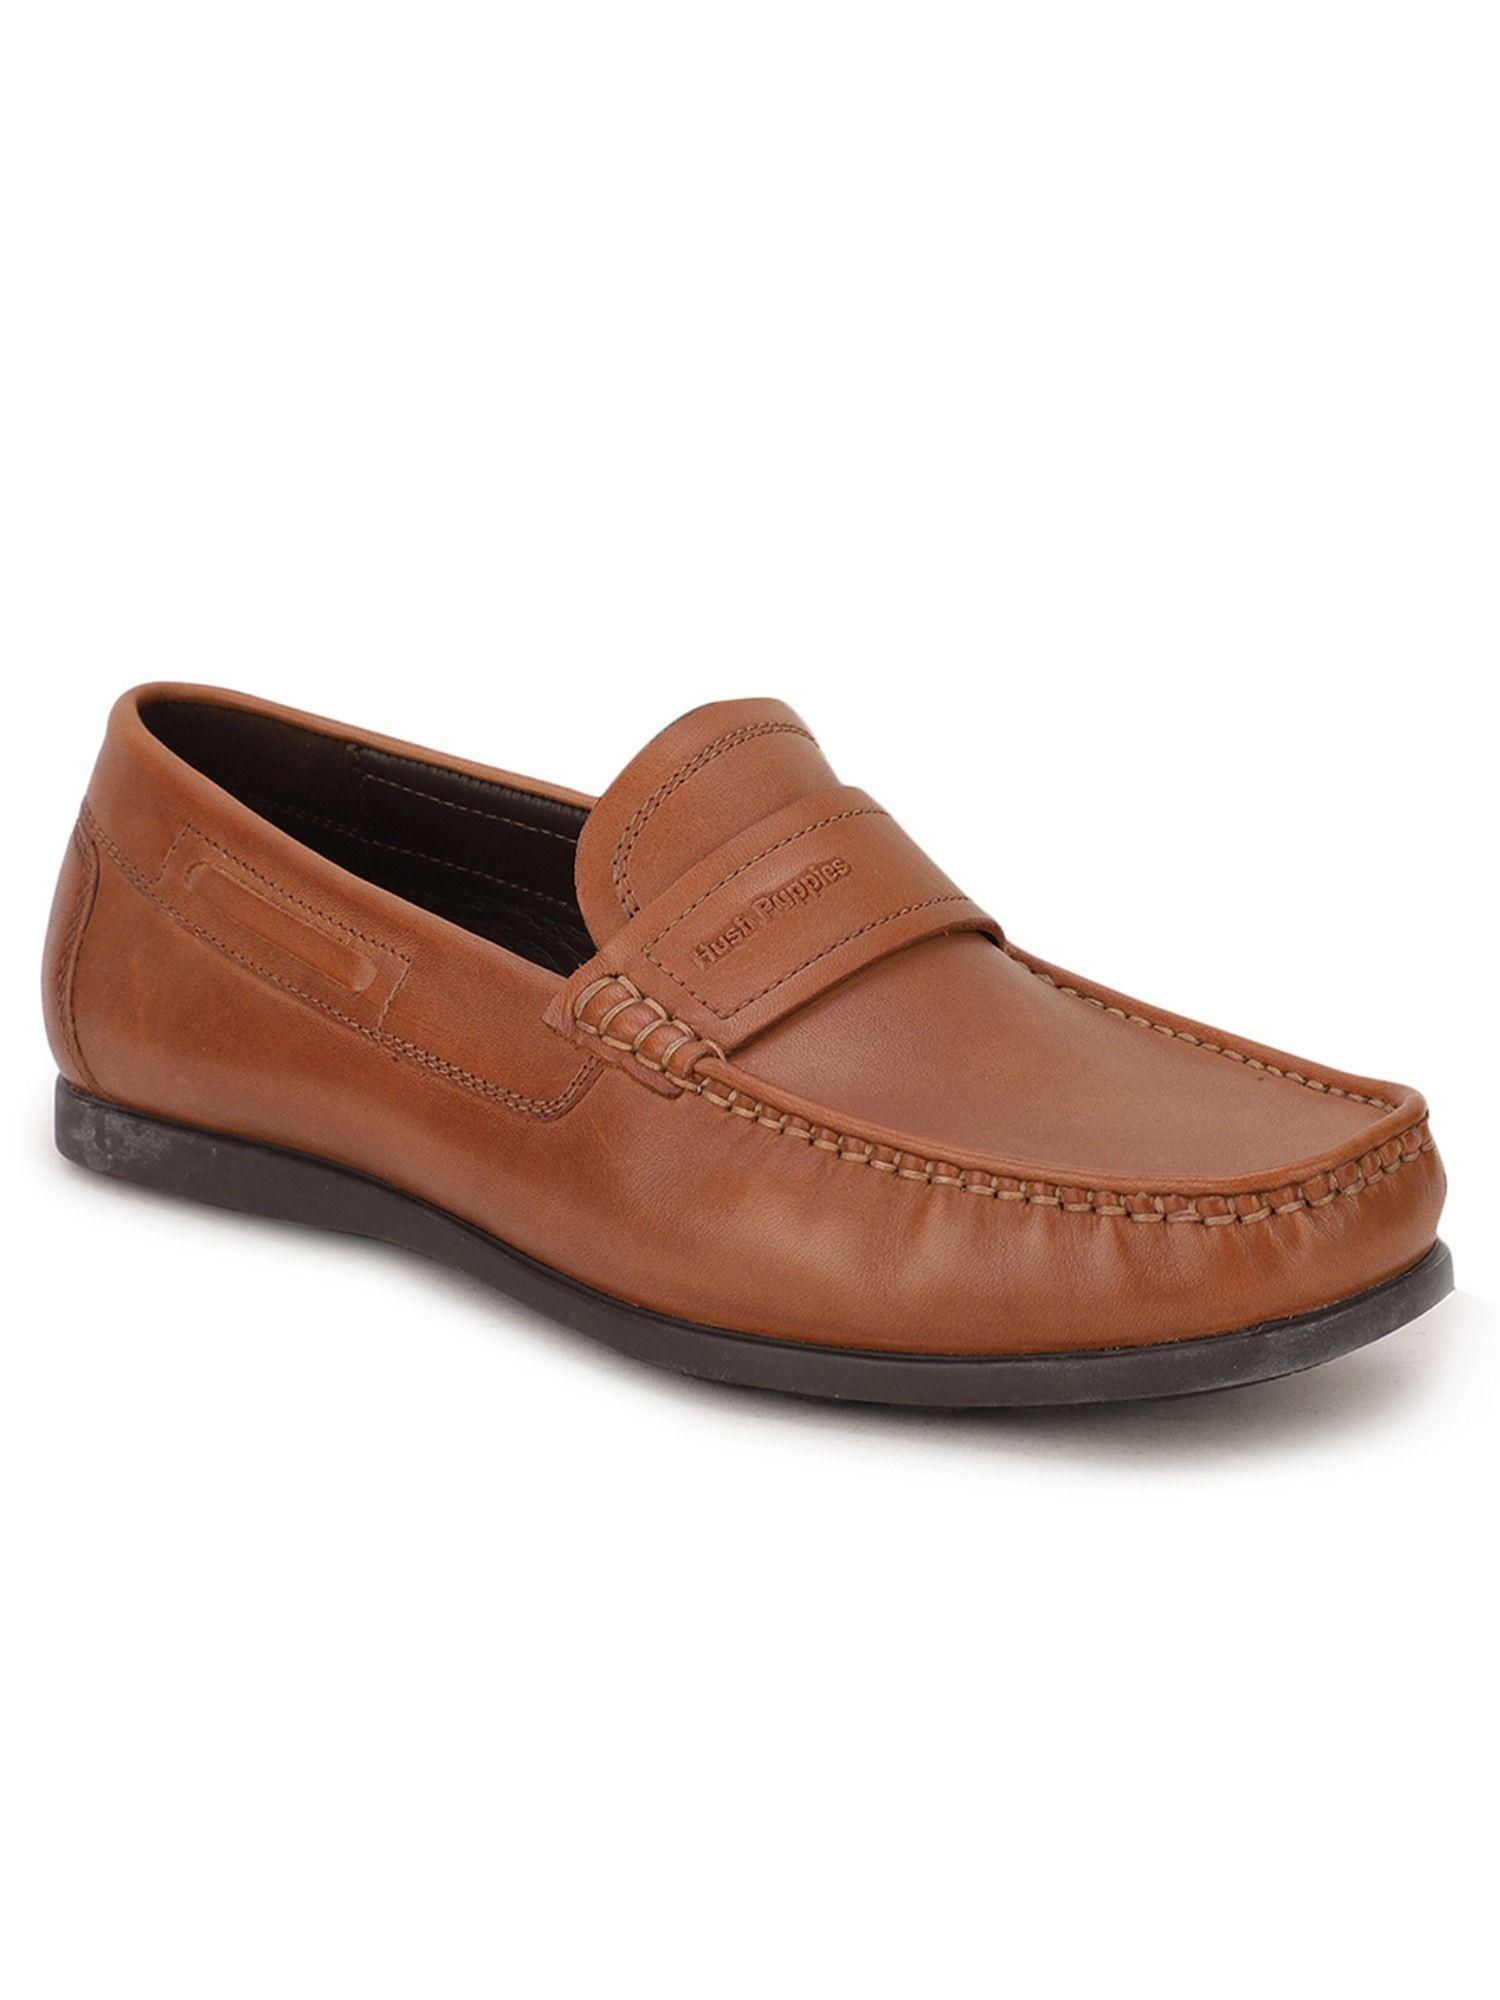 tan casual shoes for men